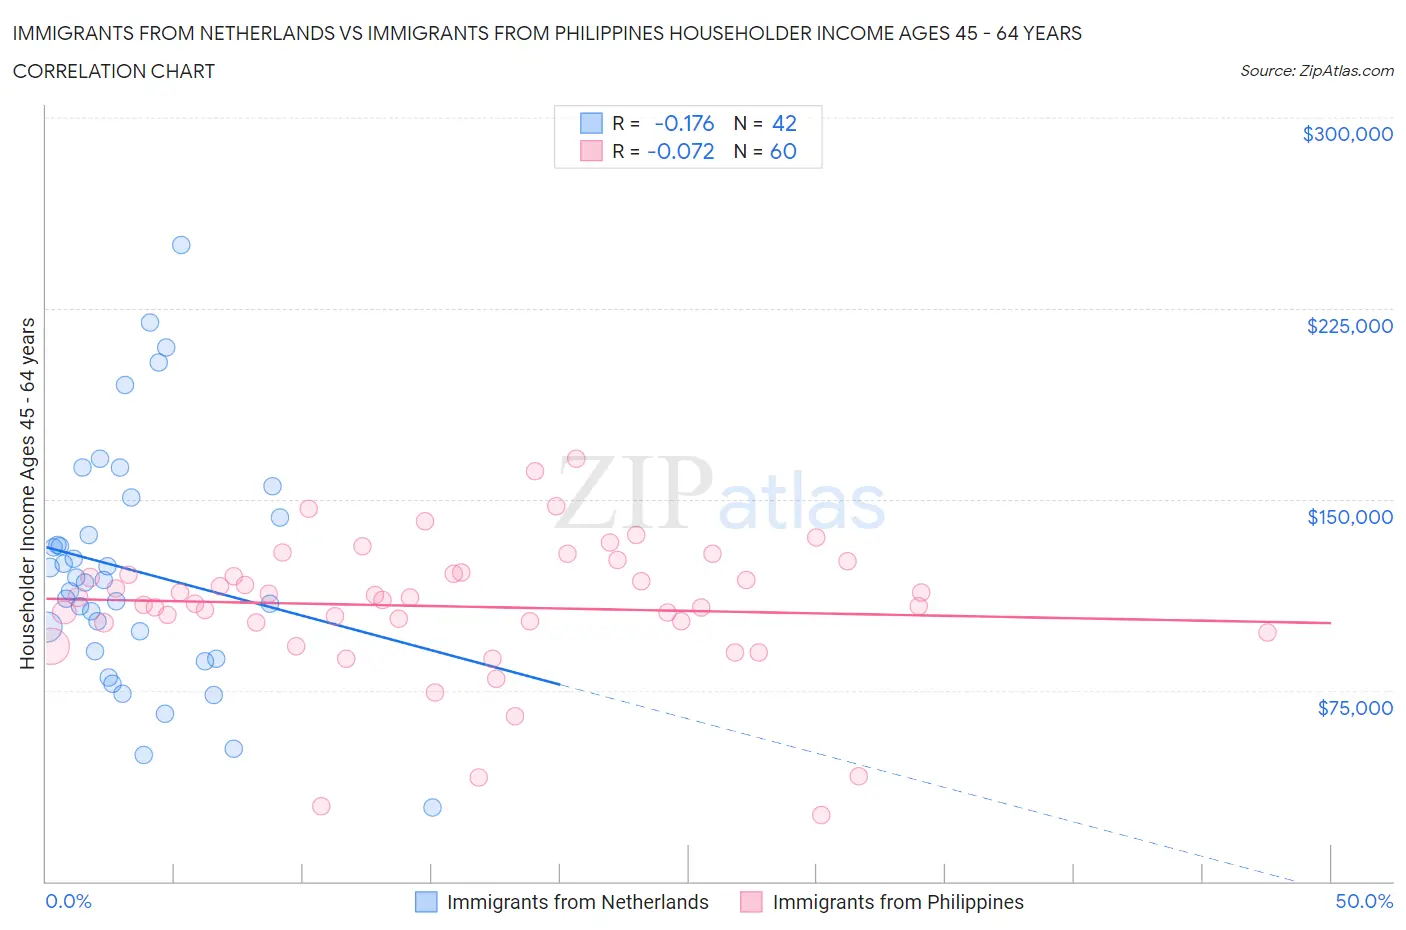 Immigrants from Netherlands vs Immigrants from Philippines Householder Income Ages 45 - 64 years